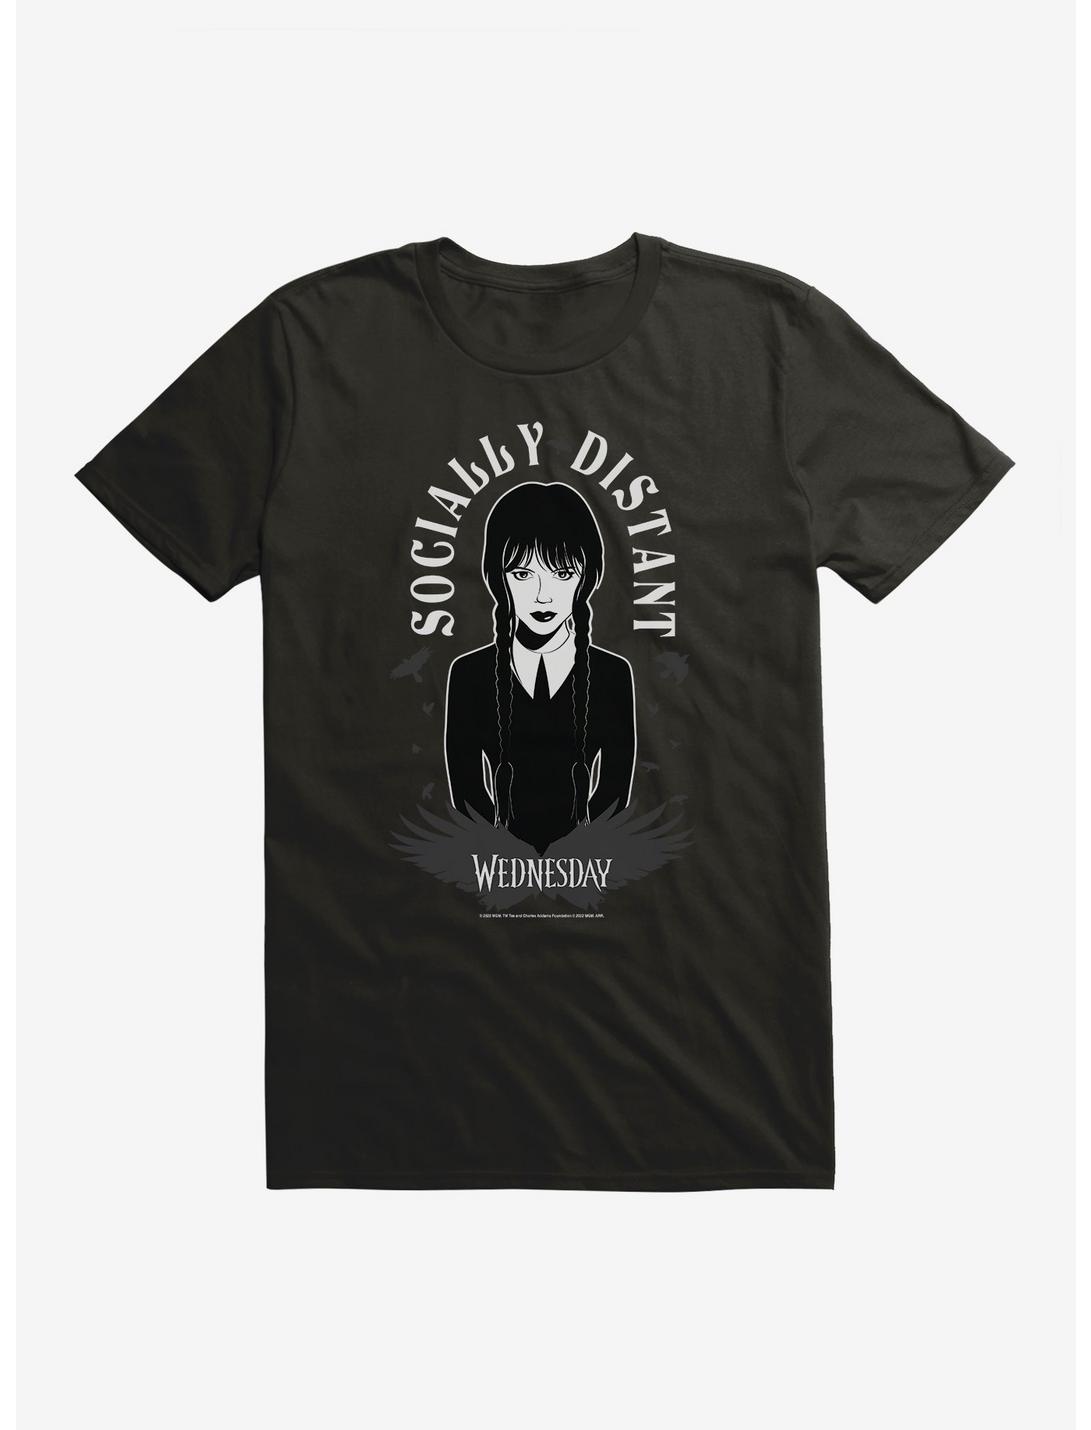 Wednesday Socially Distant T-Shirt, BLACK, hi-res